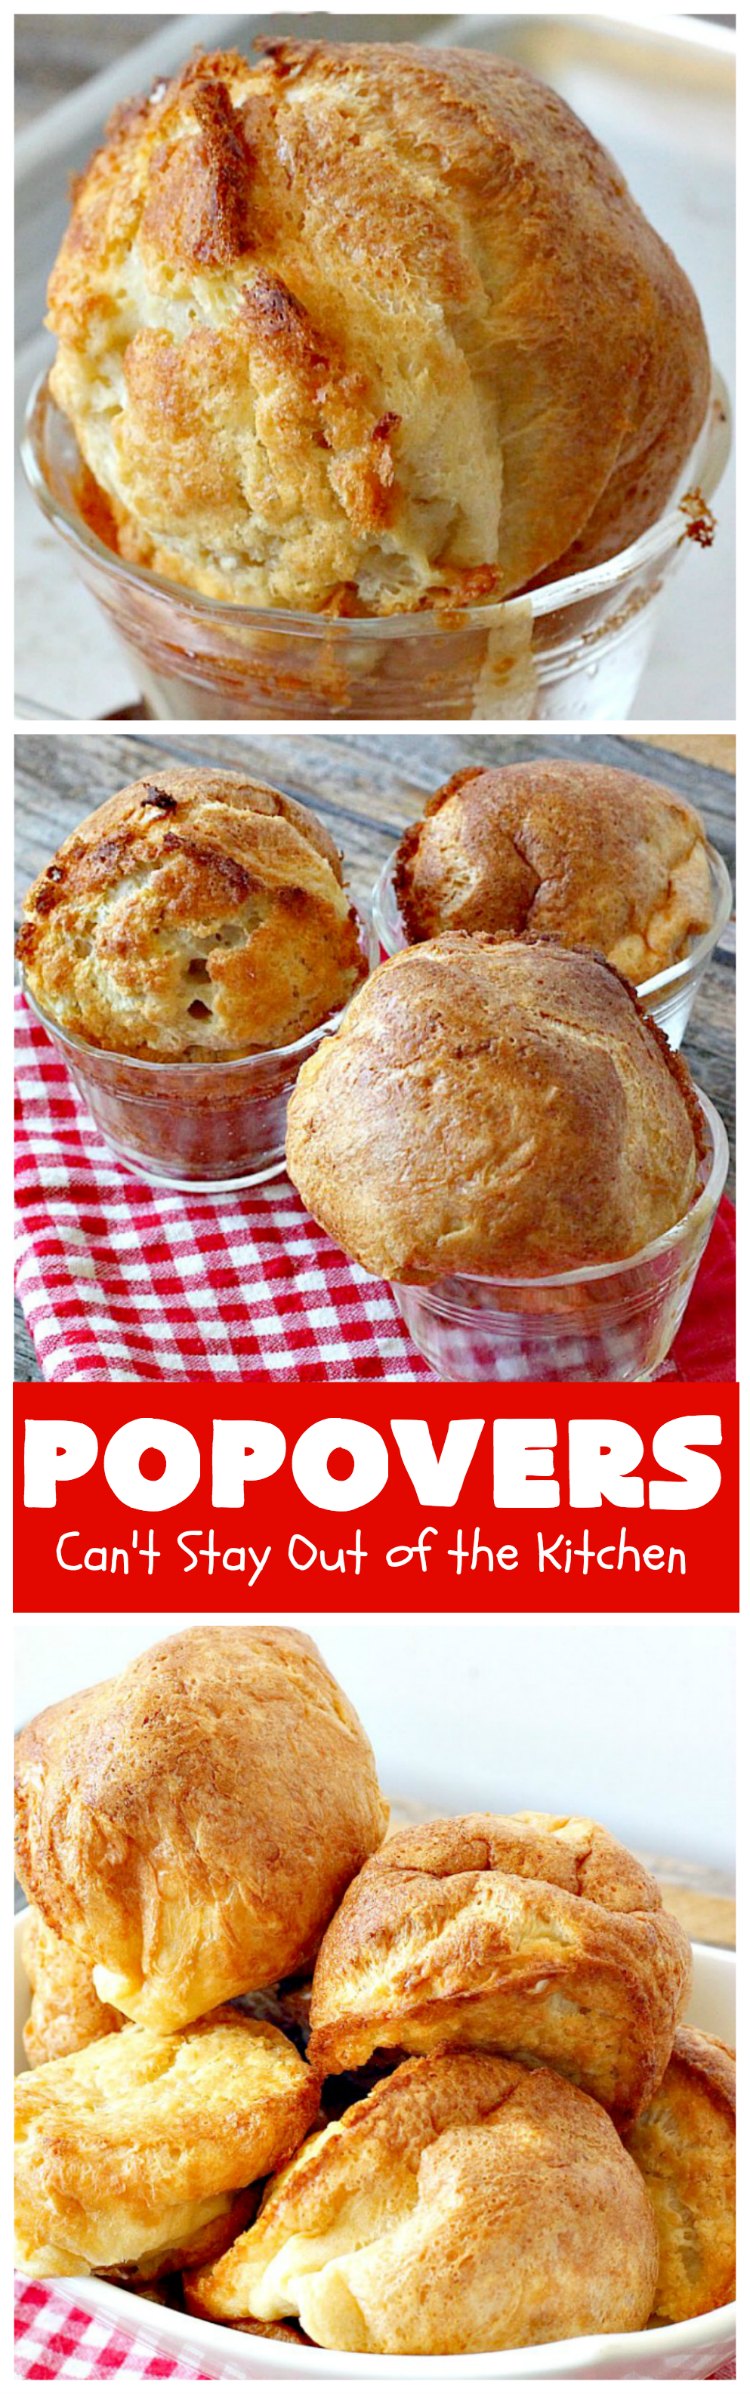 Popovers | Can't Stay Out of the Kitchen | these elegant #dinnerrolls are great for company and #holidays. Easy & economical. #bread 